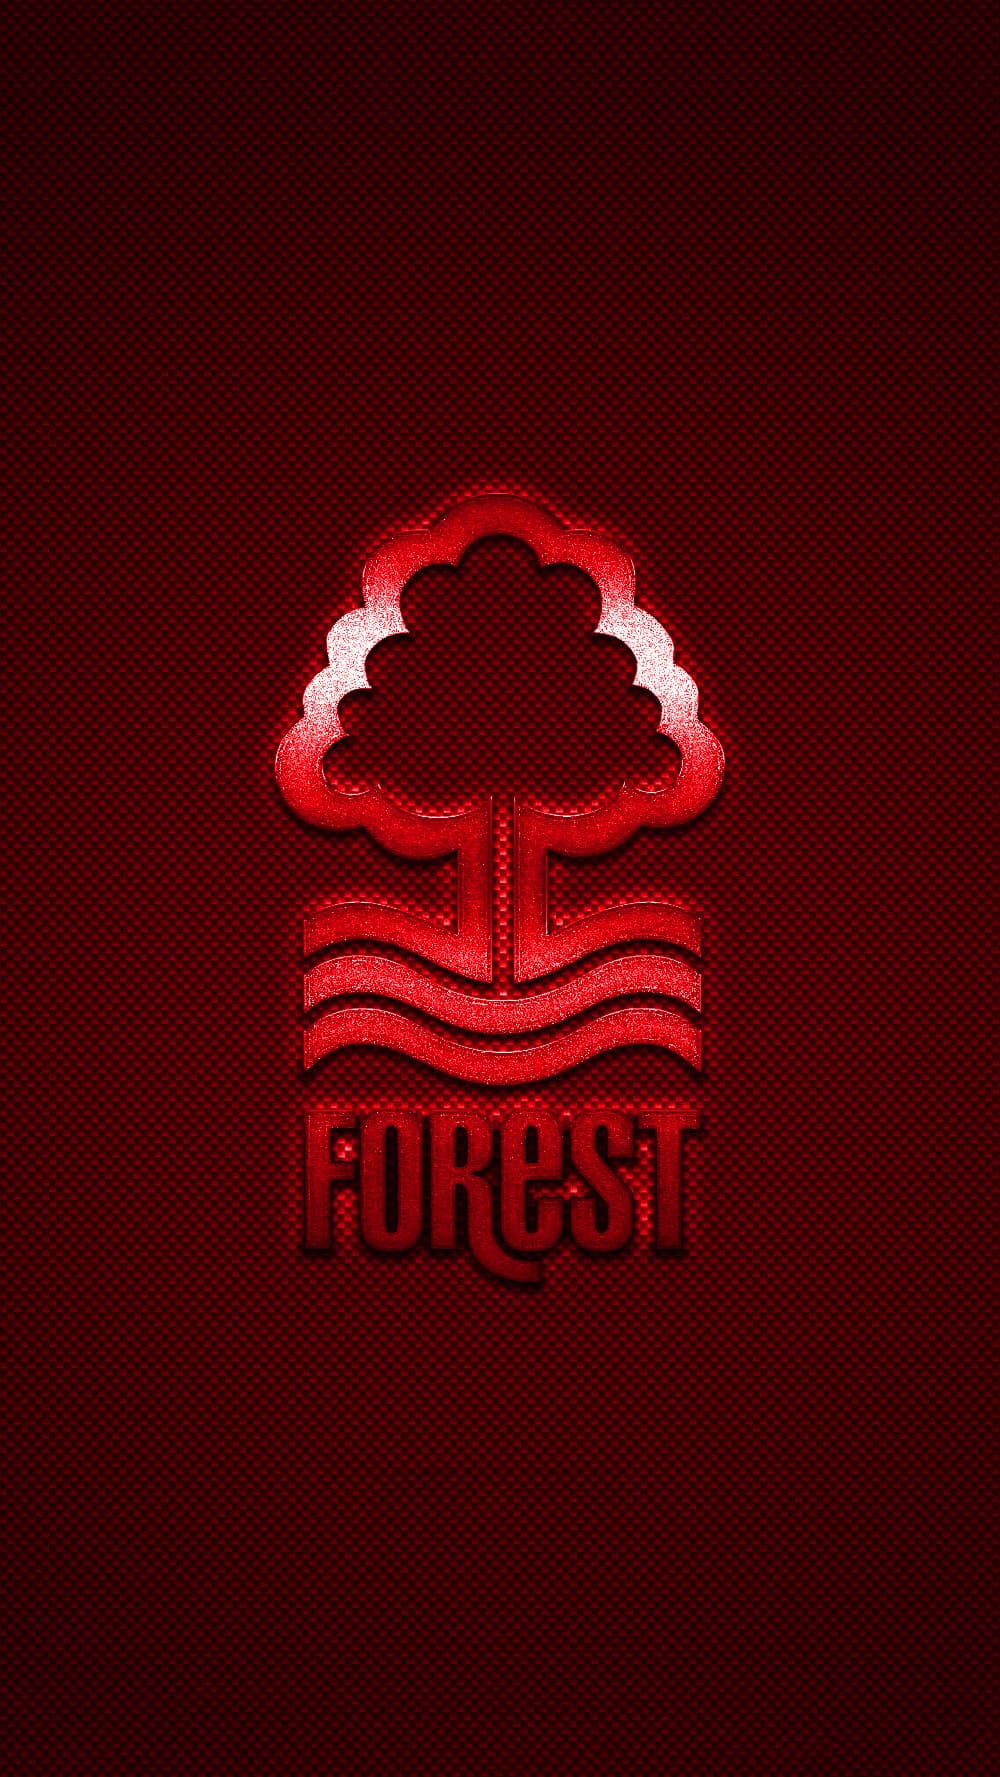 Nottingham Forest Wallpapers